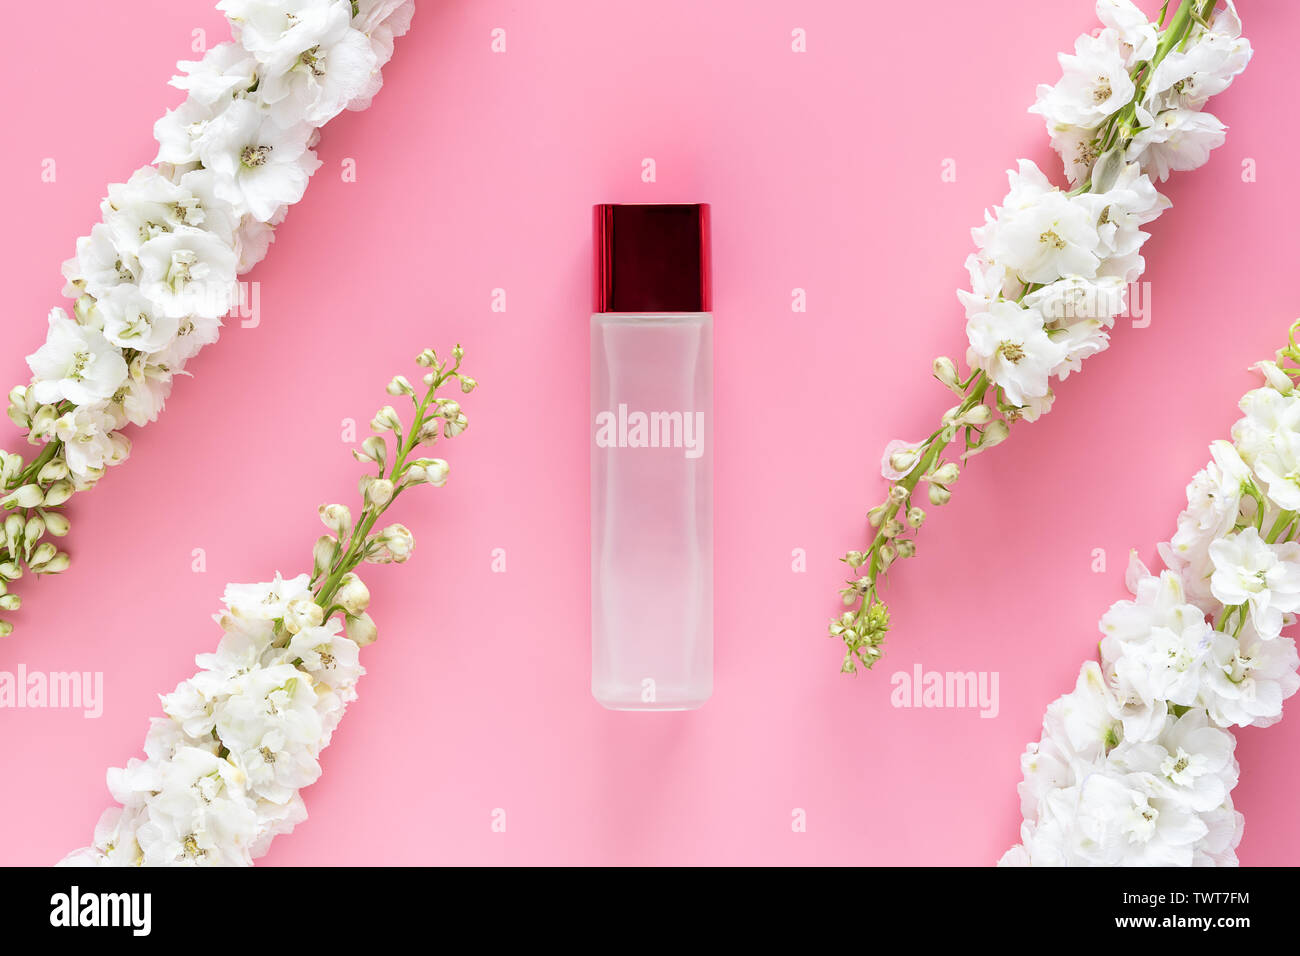 natural beauty skincare product. luxury cosmetic bottle container with white spring flower herbal on pastel pink background. blank label for branding Stock Photo